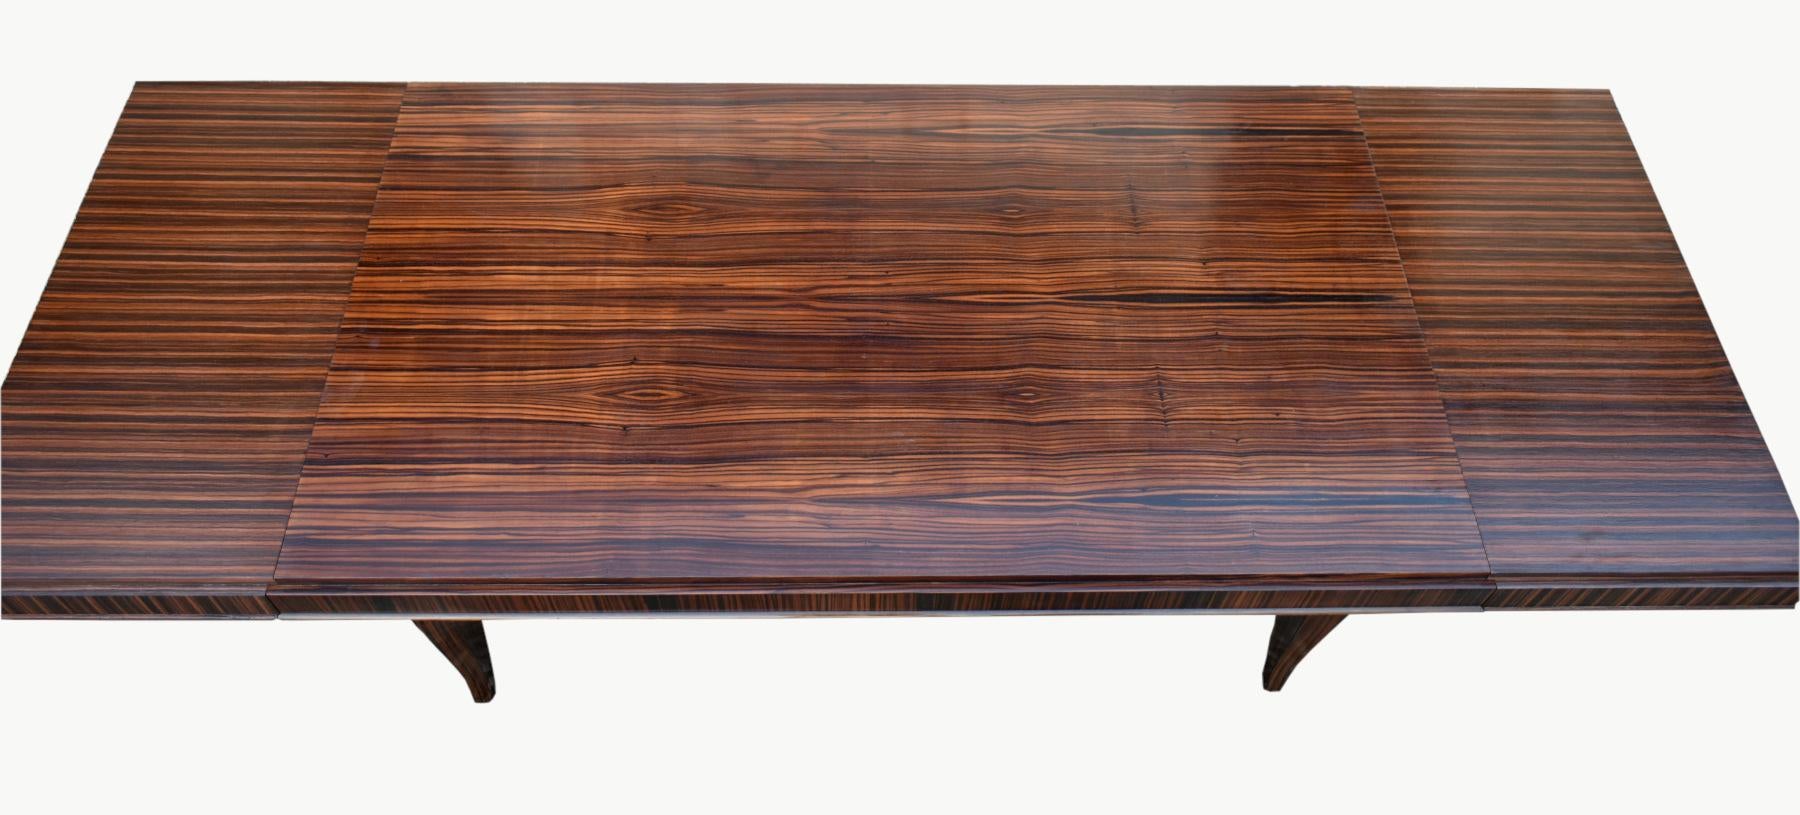 Impressive French Macassar Ebony Dining Table Art Deco Style For Sale 3